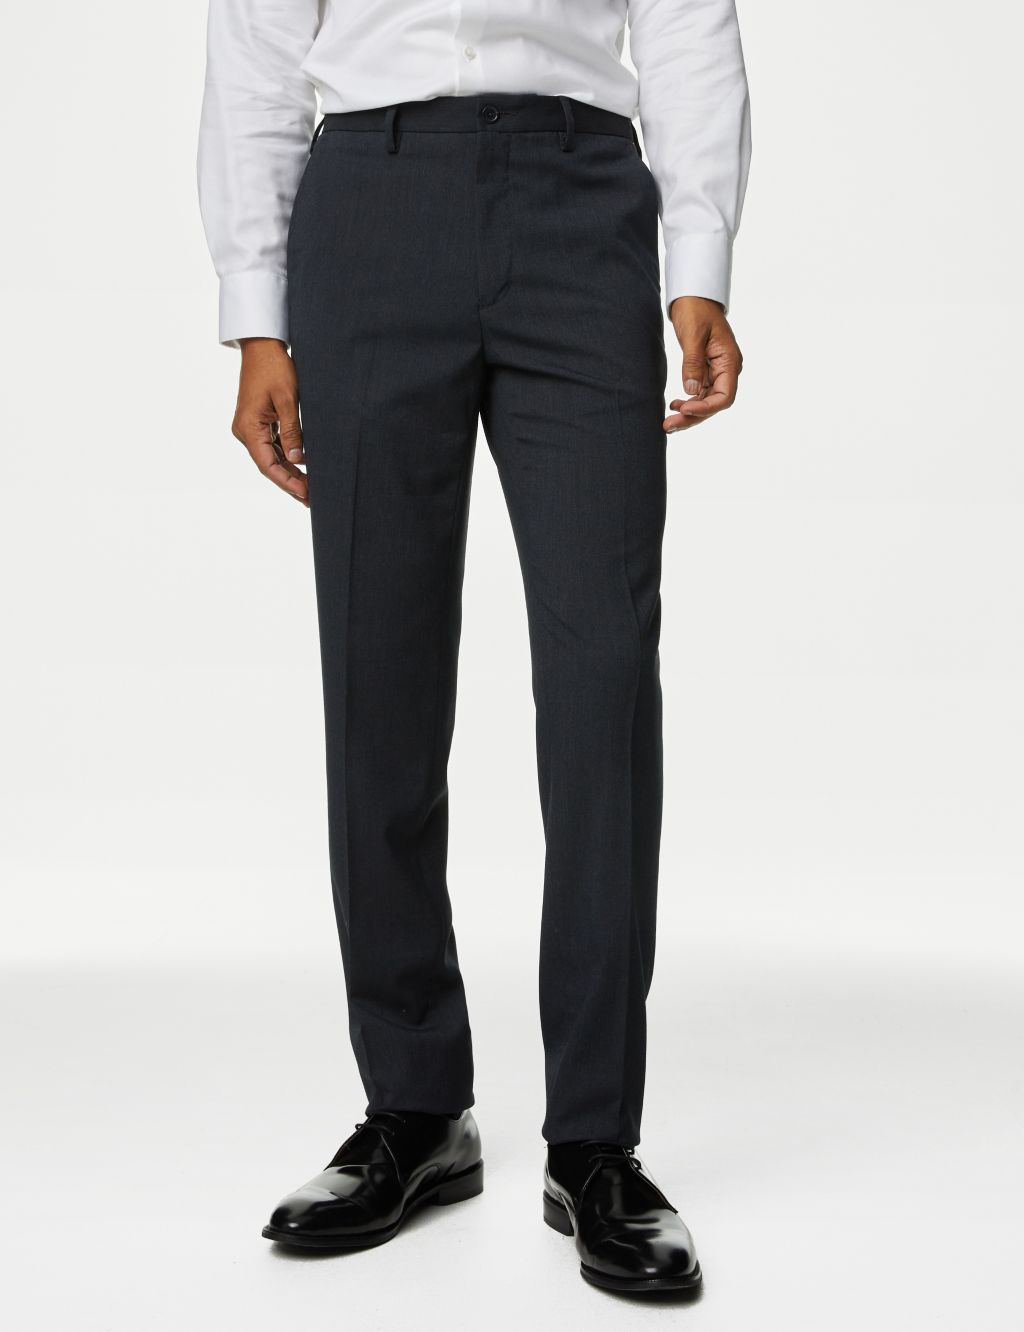 Slim Fit Flat Front Stretch Trousers image 2